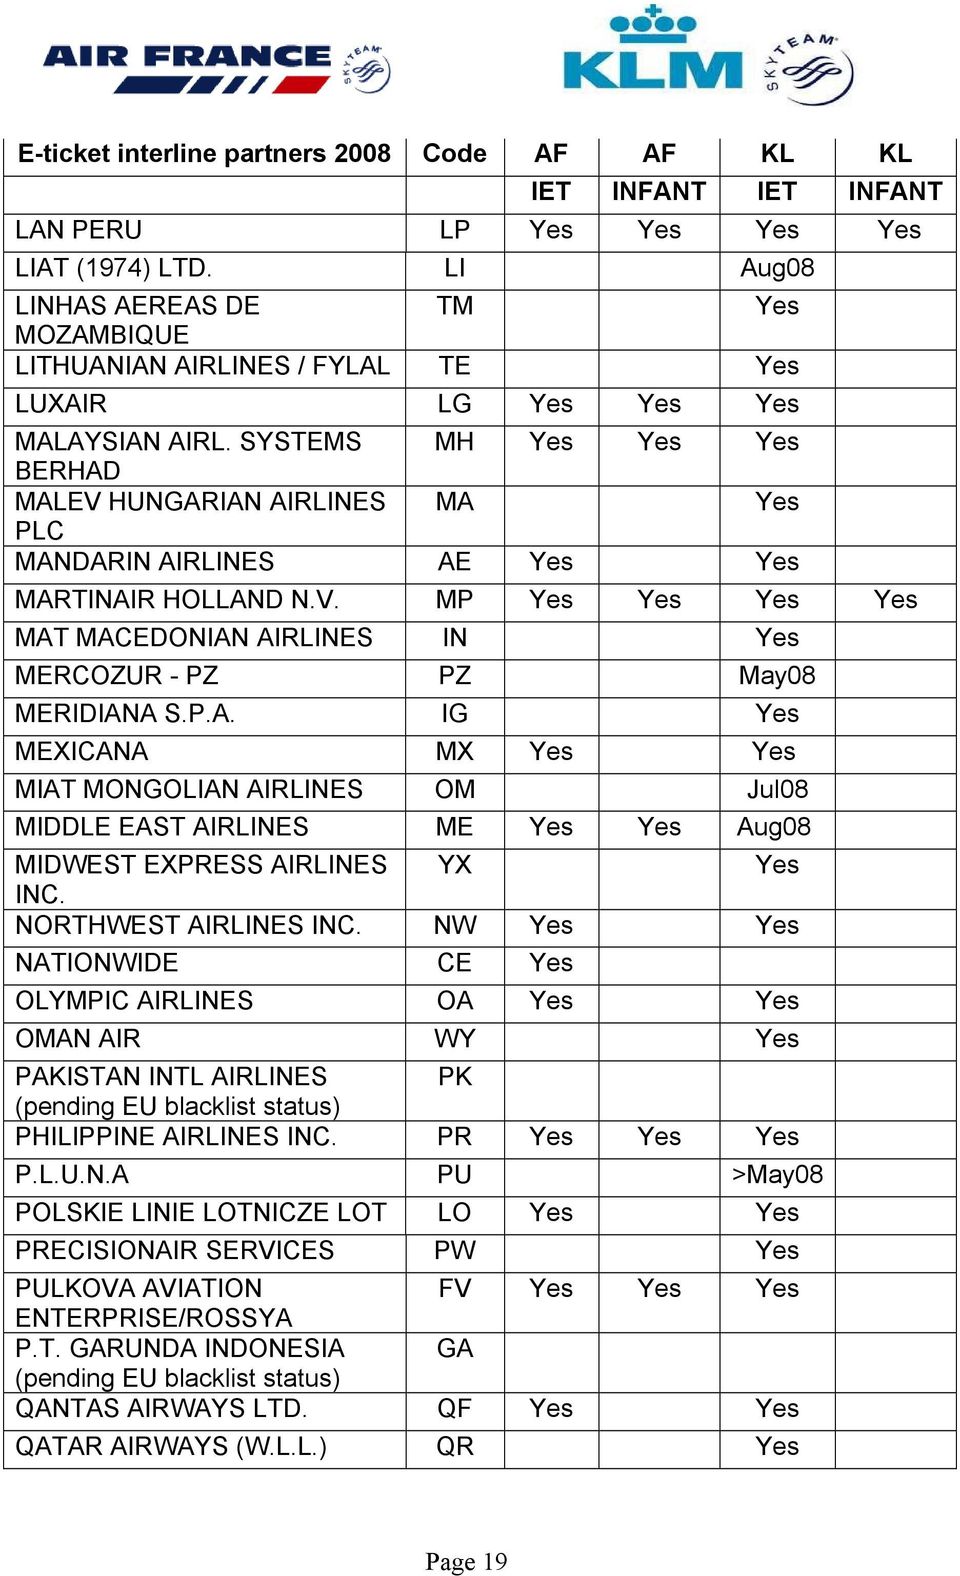 SYSTEMS MH Yes Yes Yes BERHAD MALEV HUNGARIAN AIRLINES MA Yes PLC MANDARIN AIRLINES AE Yes Yes MARTINAIR HOLLAND N.V. MP Yes Yes Yes Yes MAT MACEDONIAN AIRLINES IN Yes MERCOZUR - PZ PZ May08 MERIDIANA S.